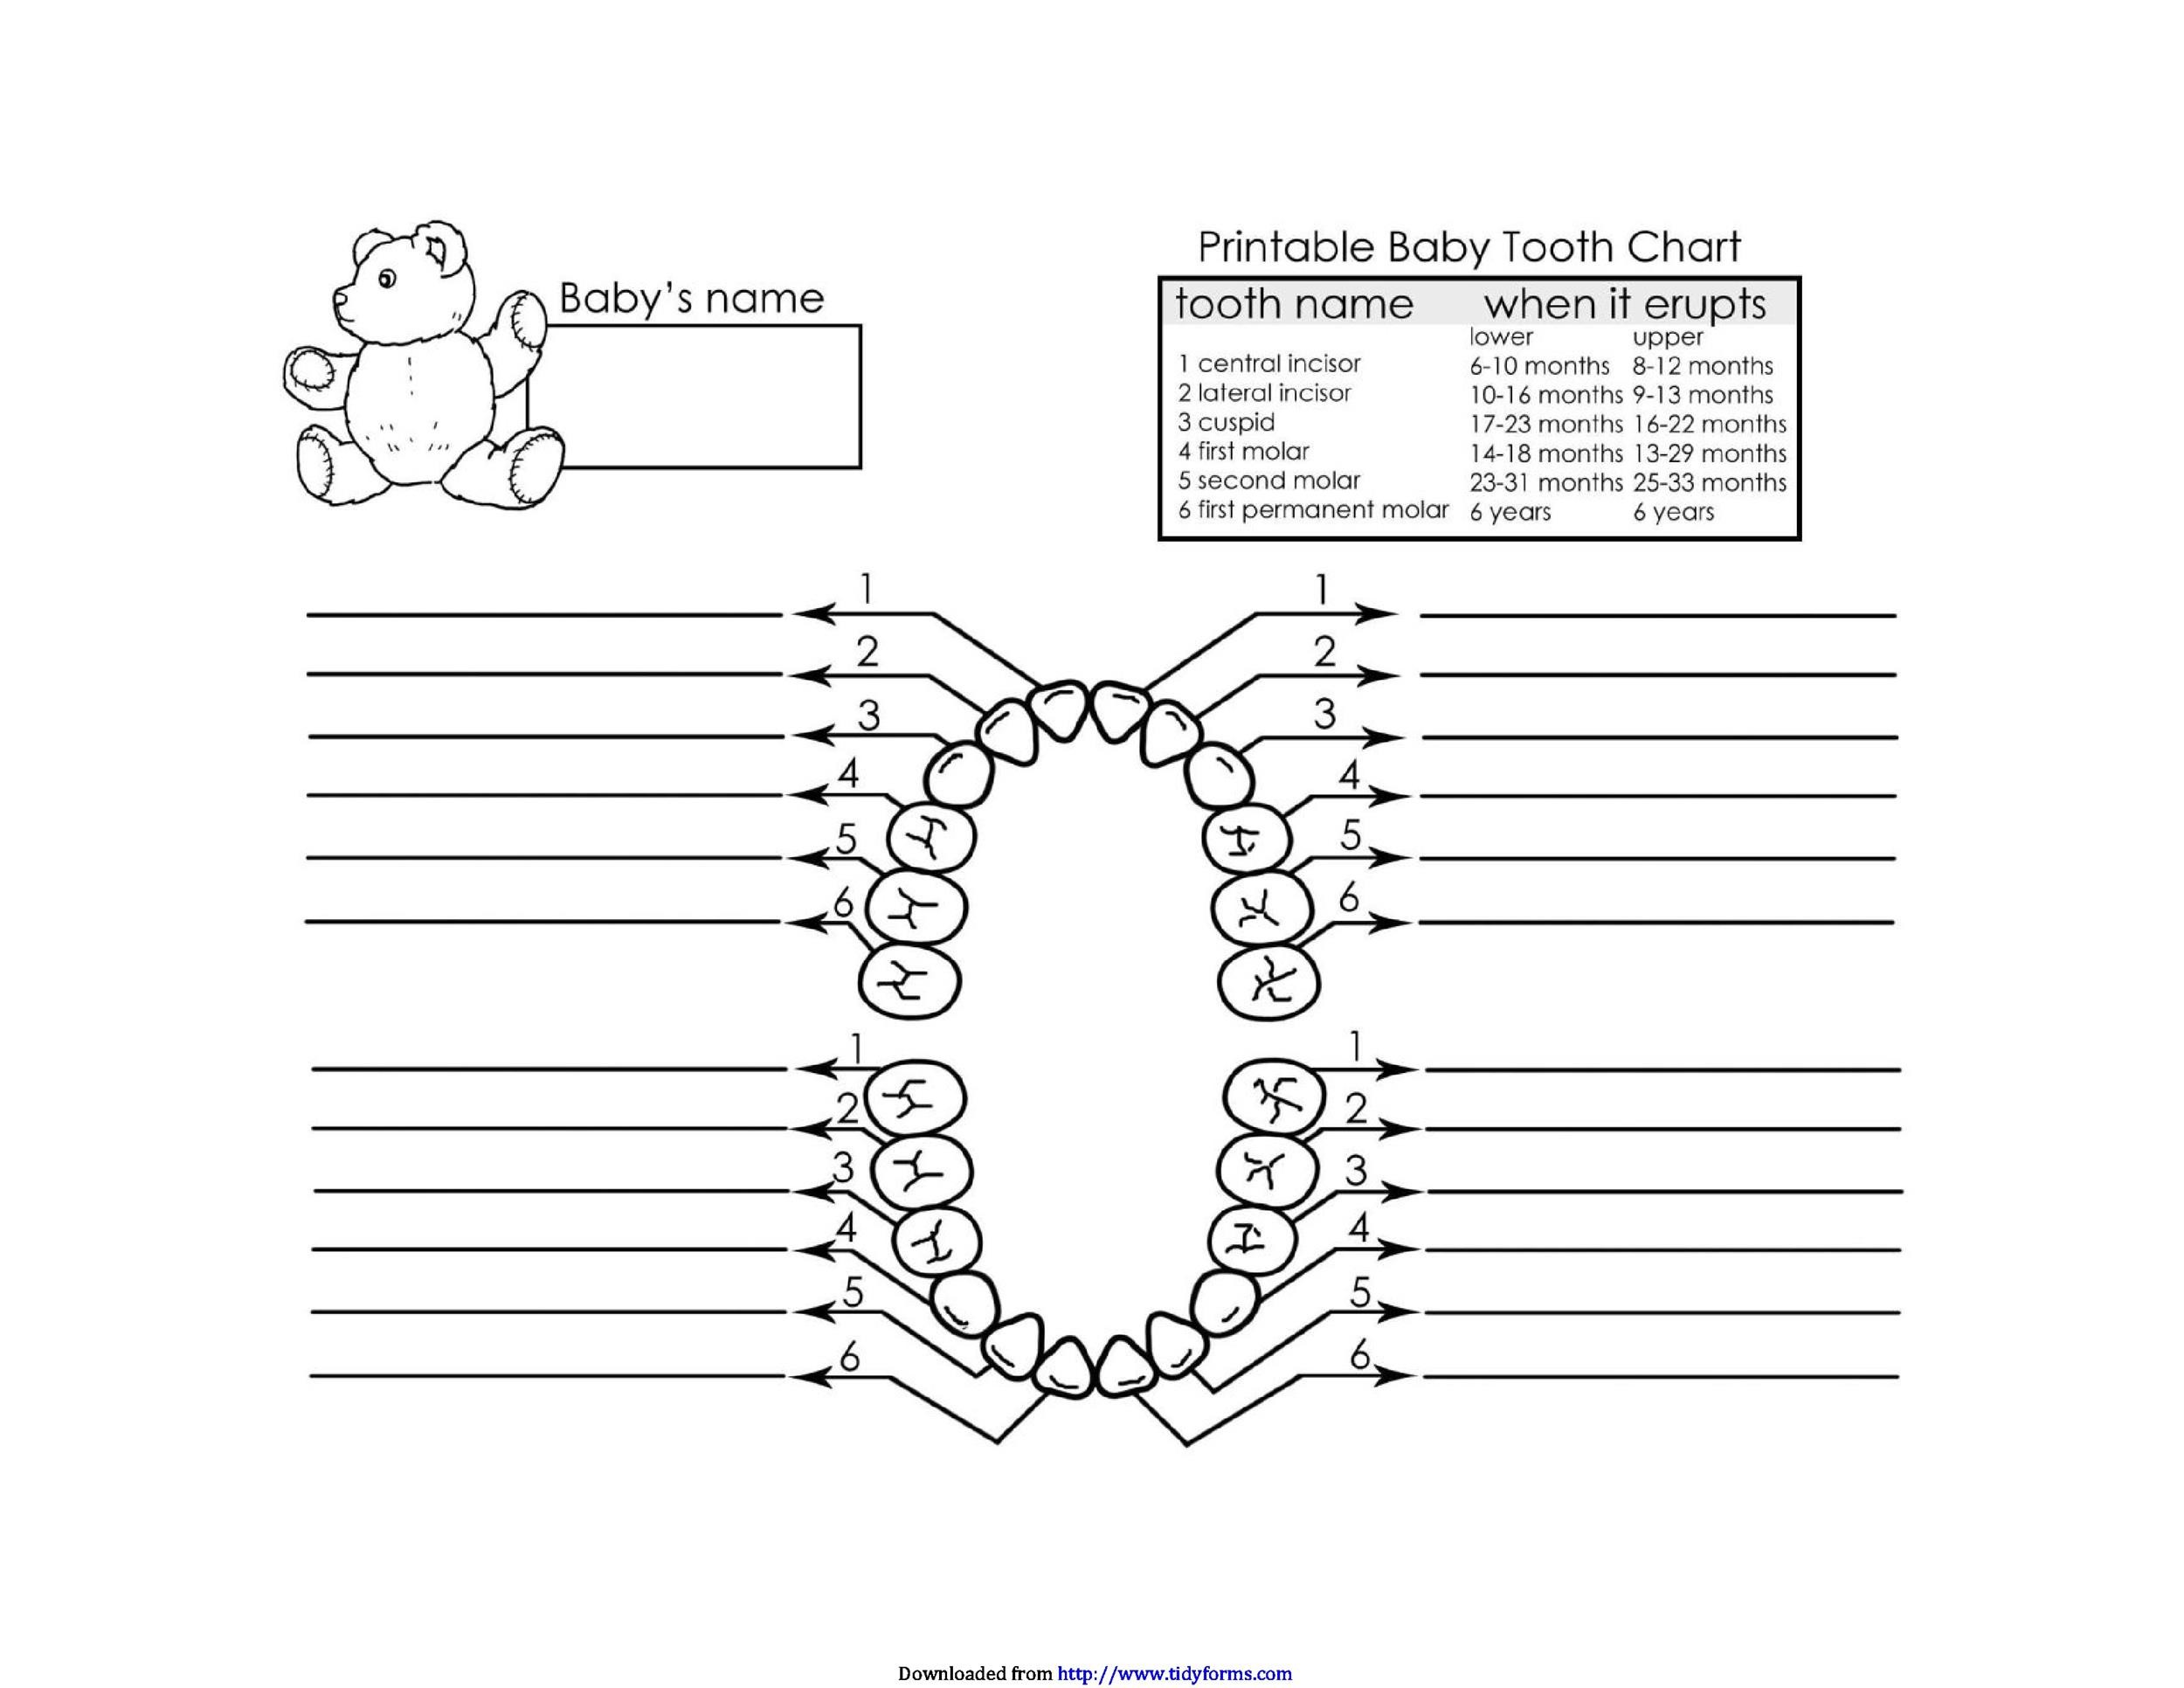 Dental Charting Practice Downloads